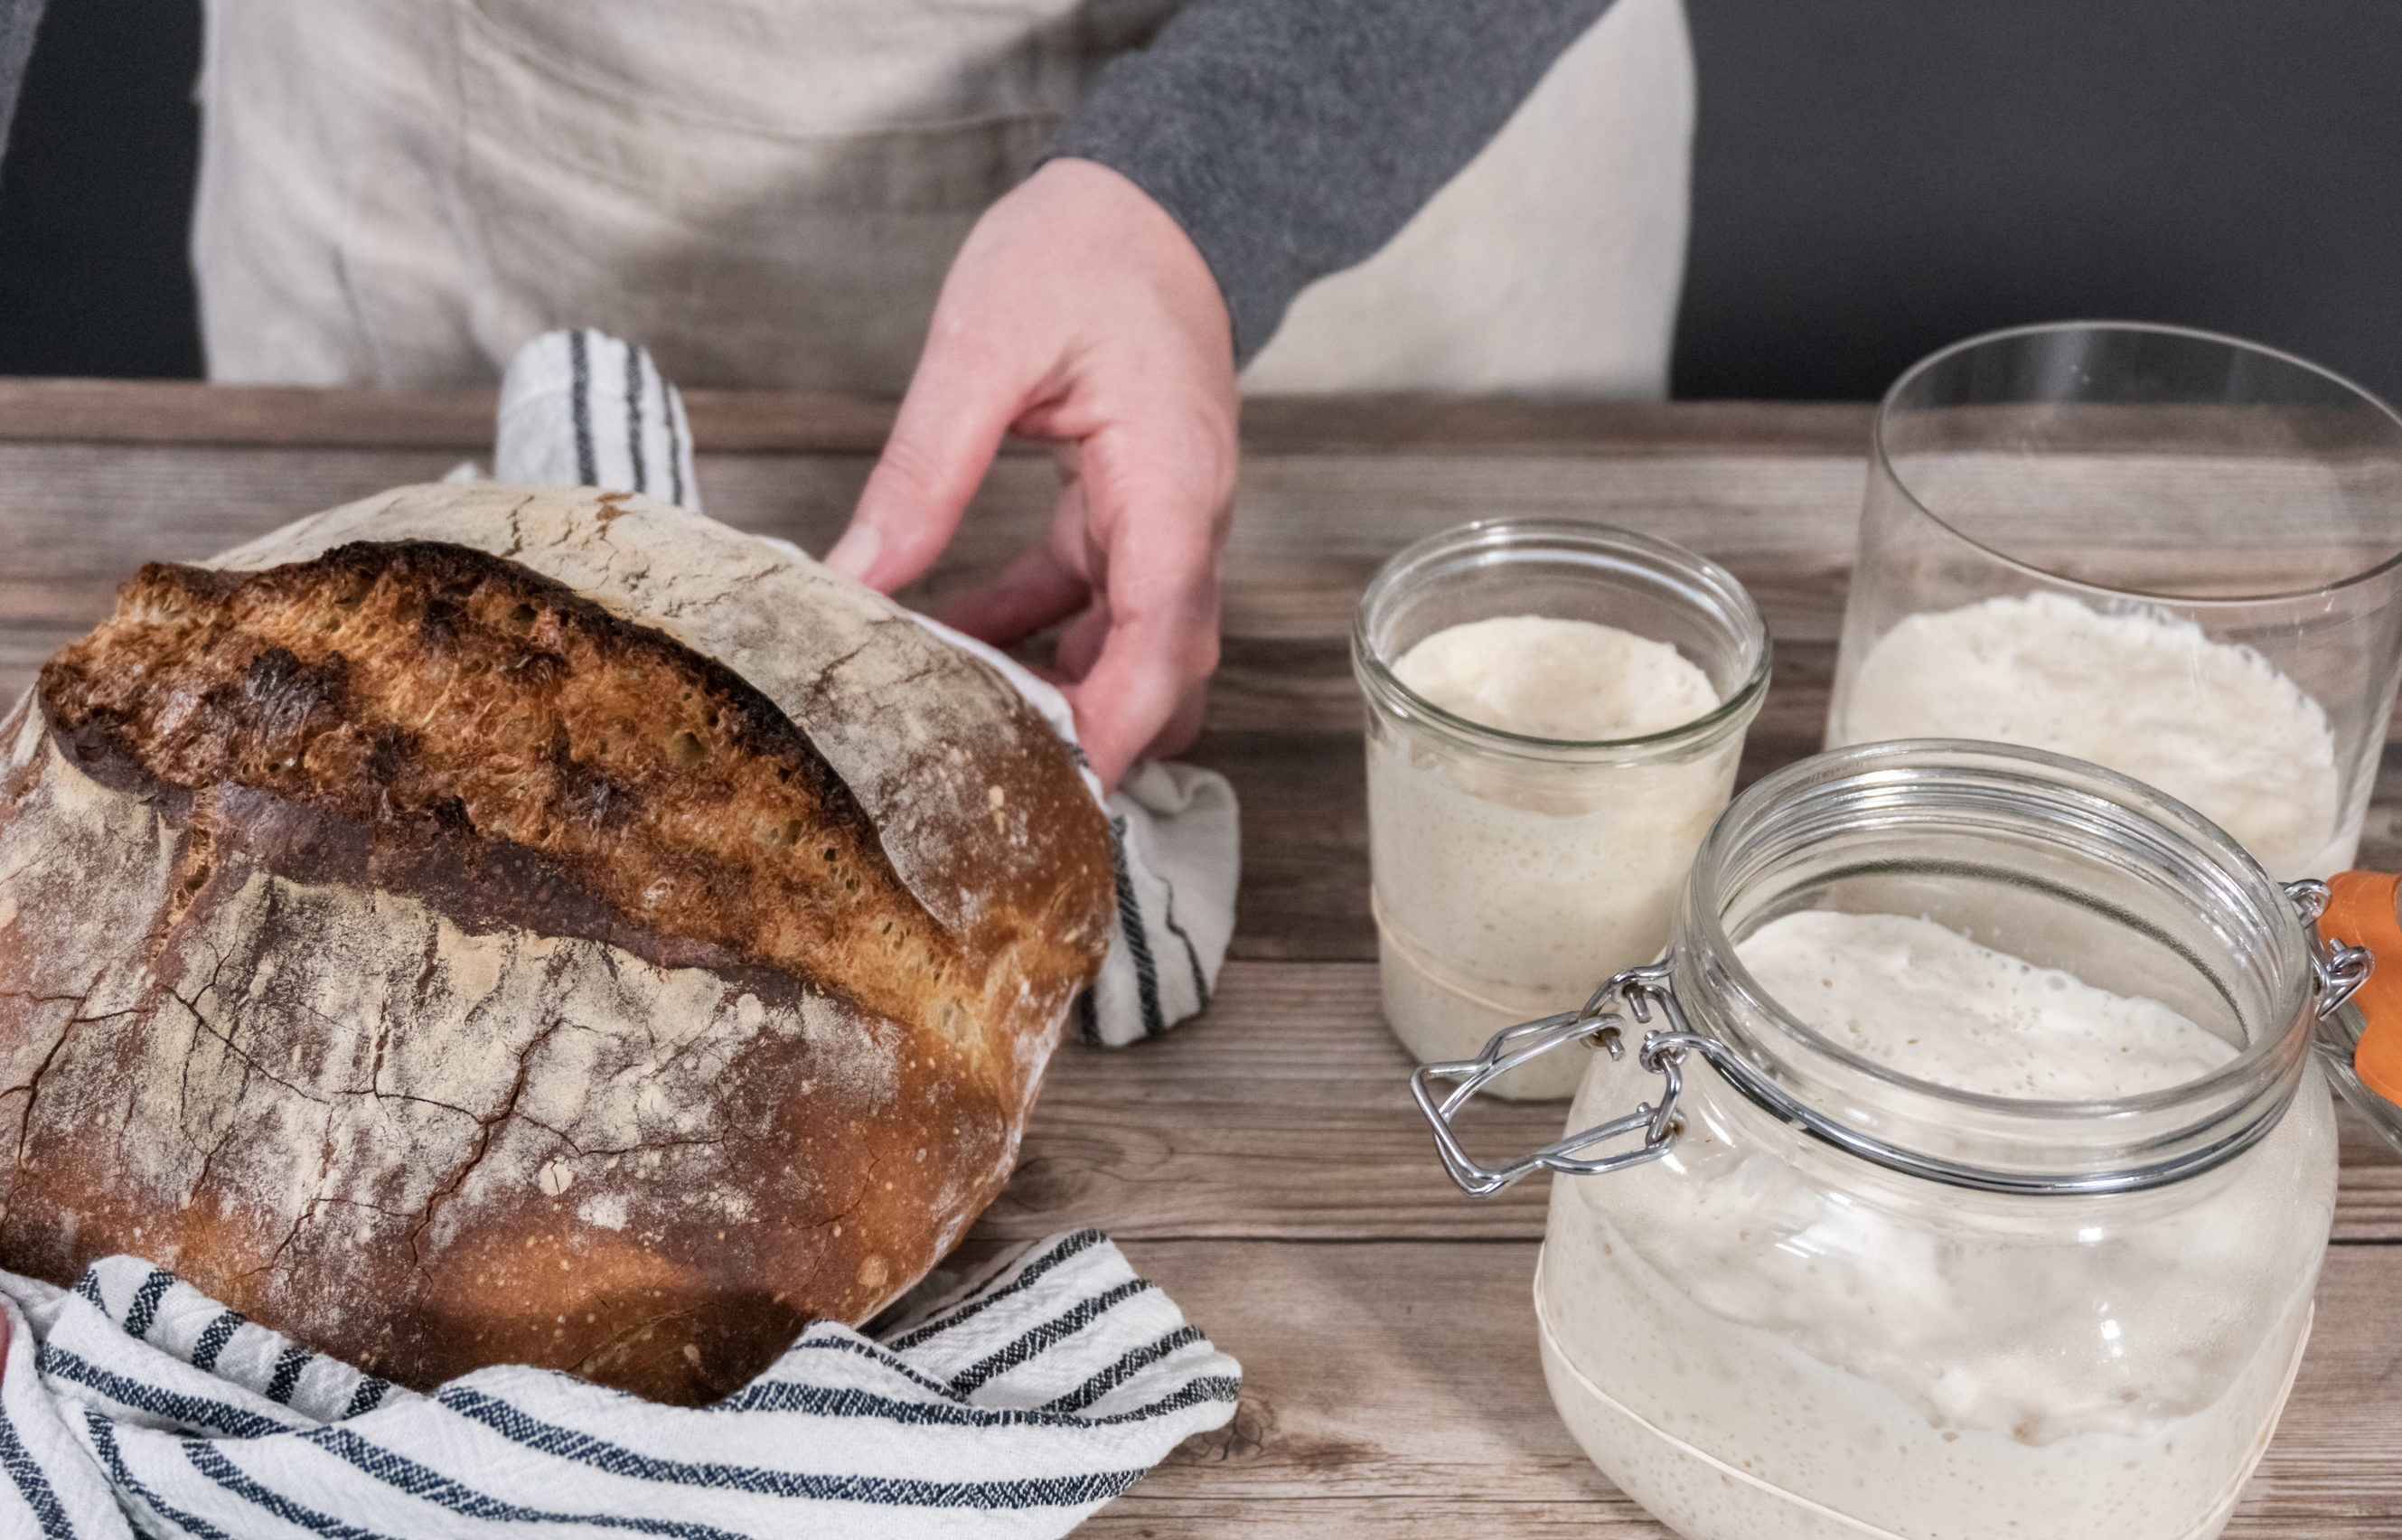 the sourdough people sourdough bread website online in canada with ecommerce products store community recipes industry interviews and brands